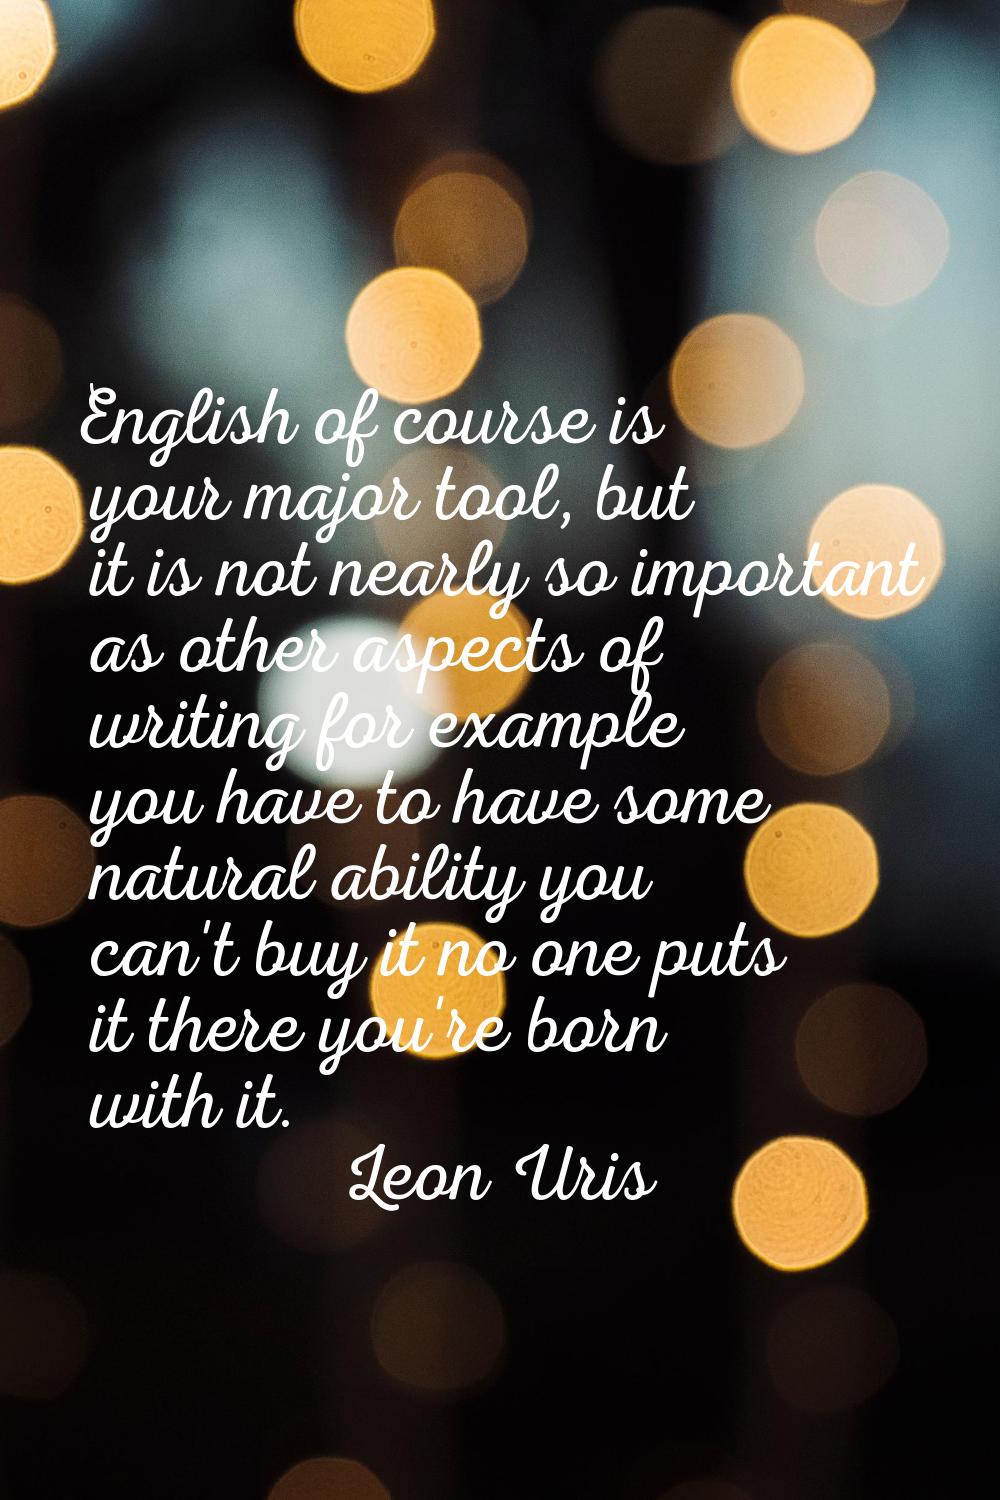 English of course is your major tool, but it is not nearly so important as other aspects of writing